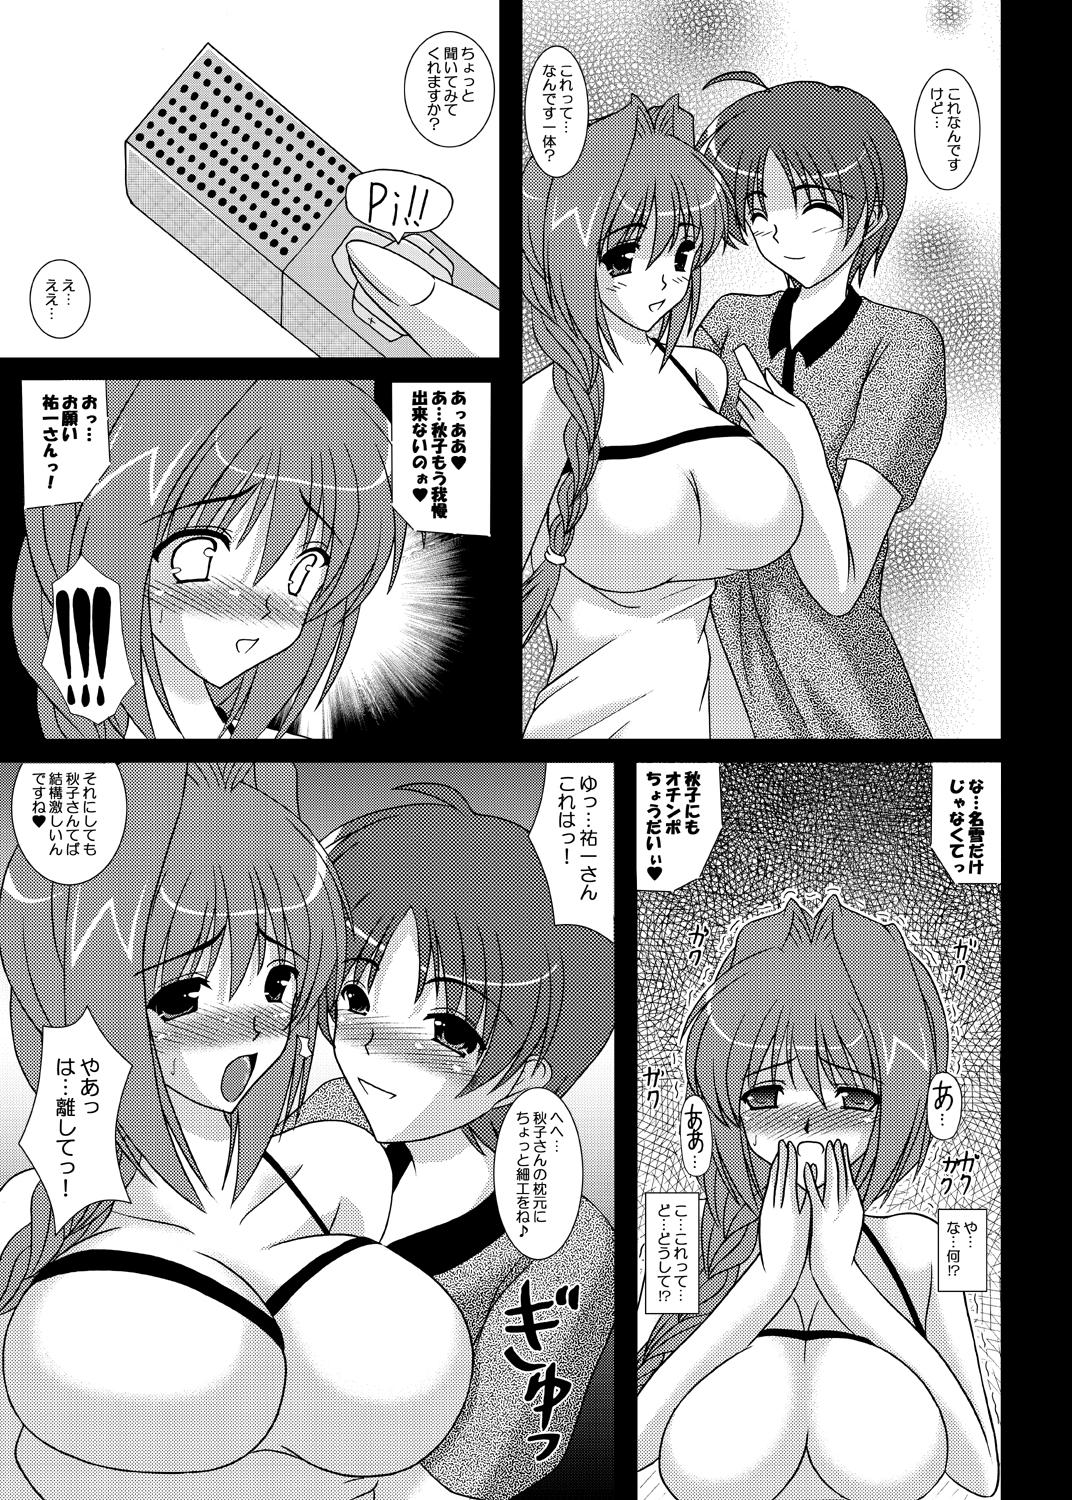 Dykes One Week Lover - Kanon Cruising - Page 10